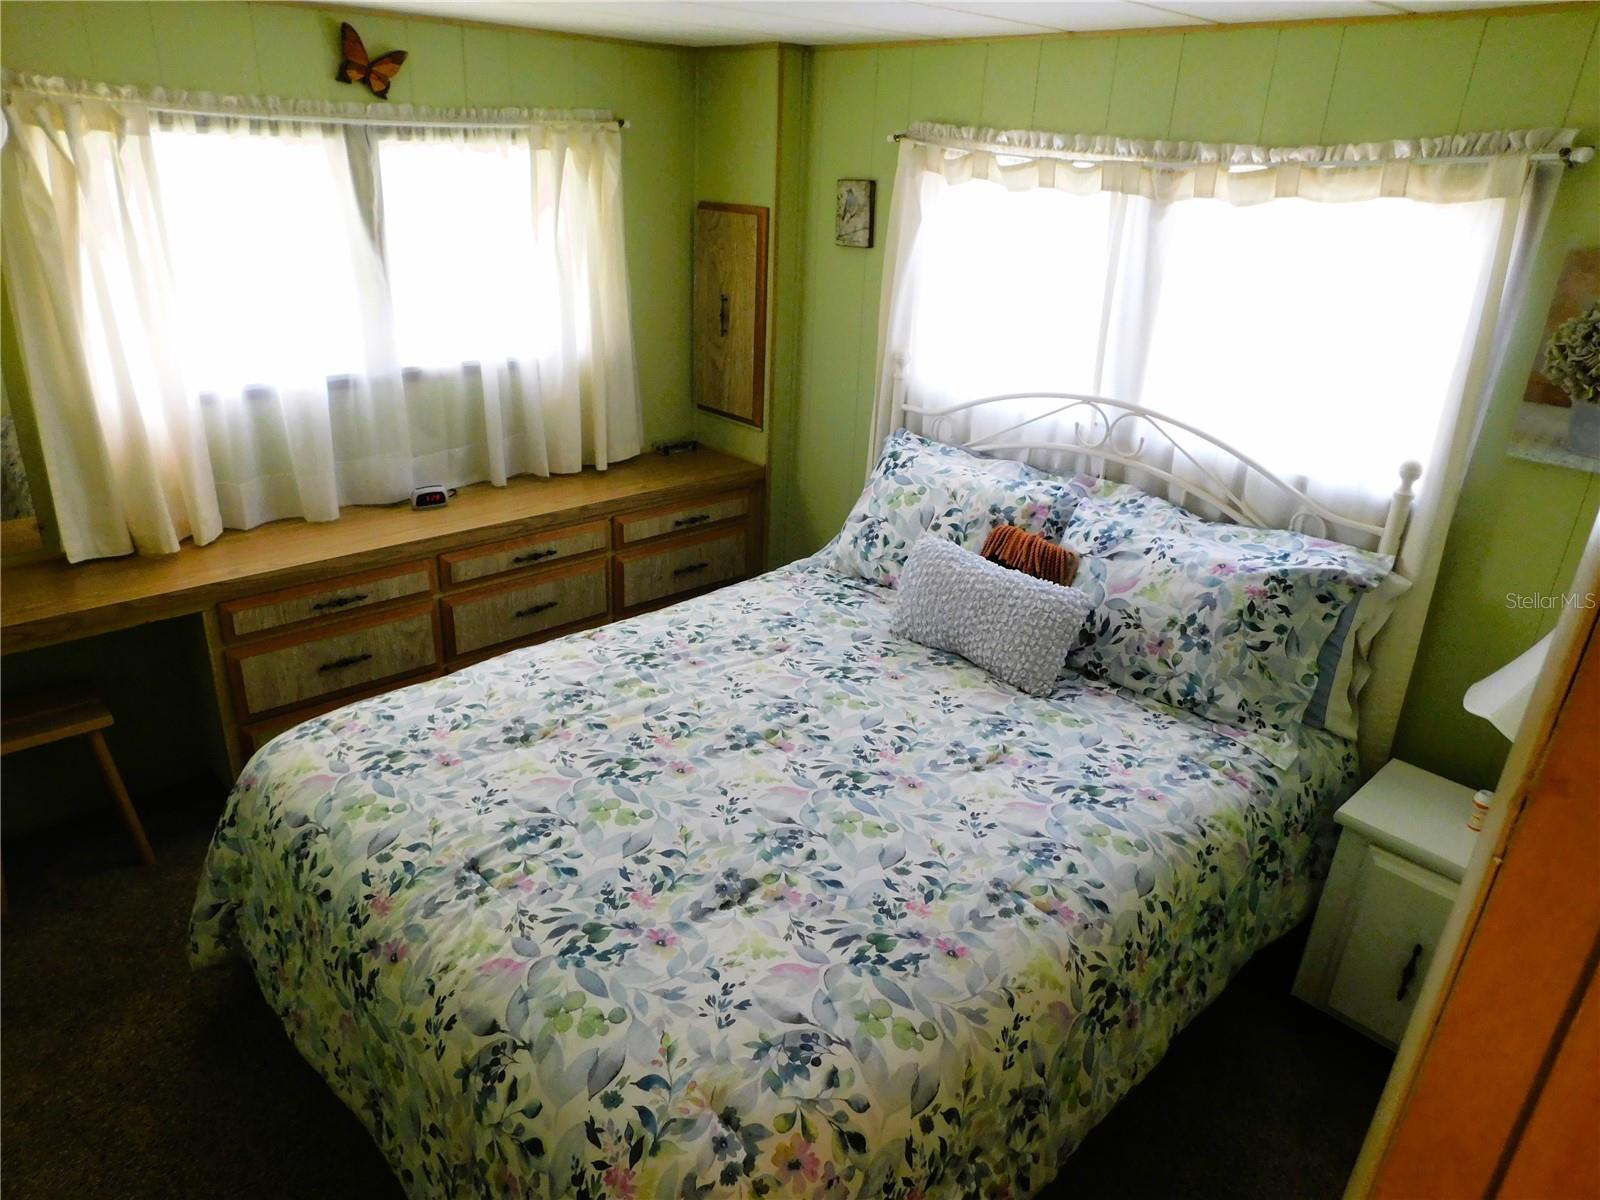 Main bedroom is located in the back of the home.